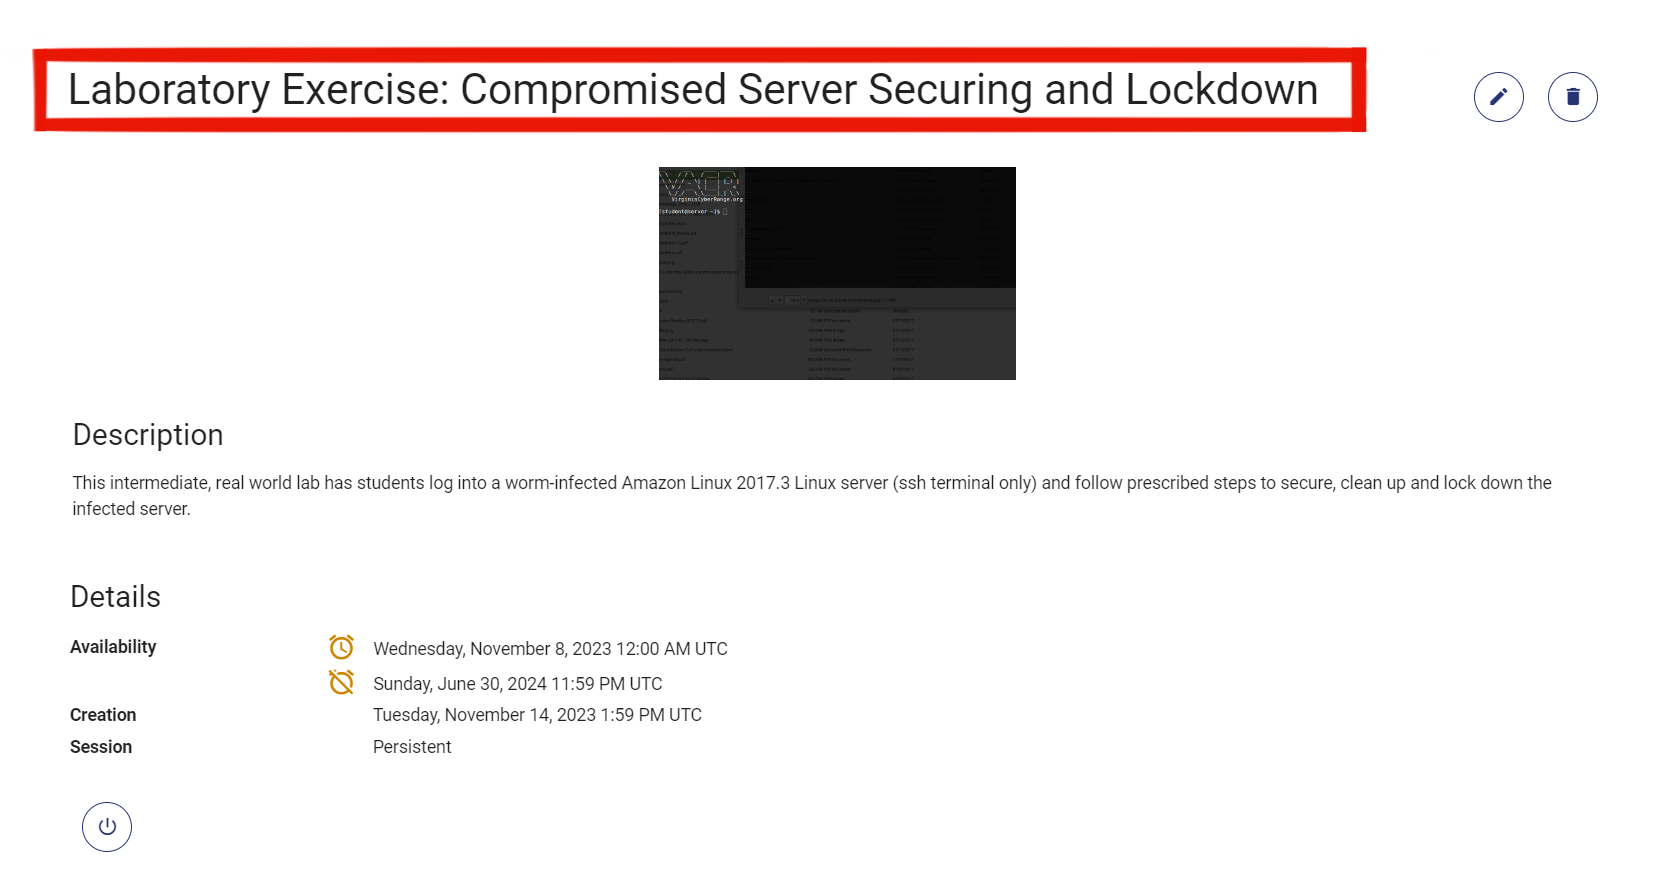 Exercise environment named "Laboratory Exercise: Compromised Server Securing and Lockdown".